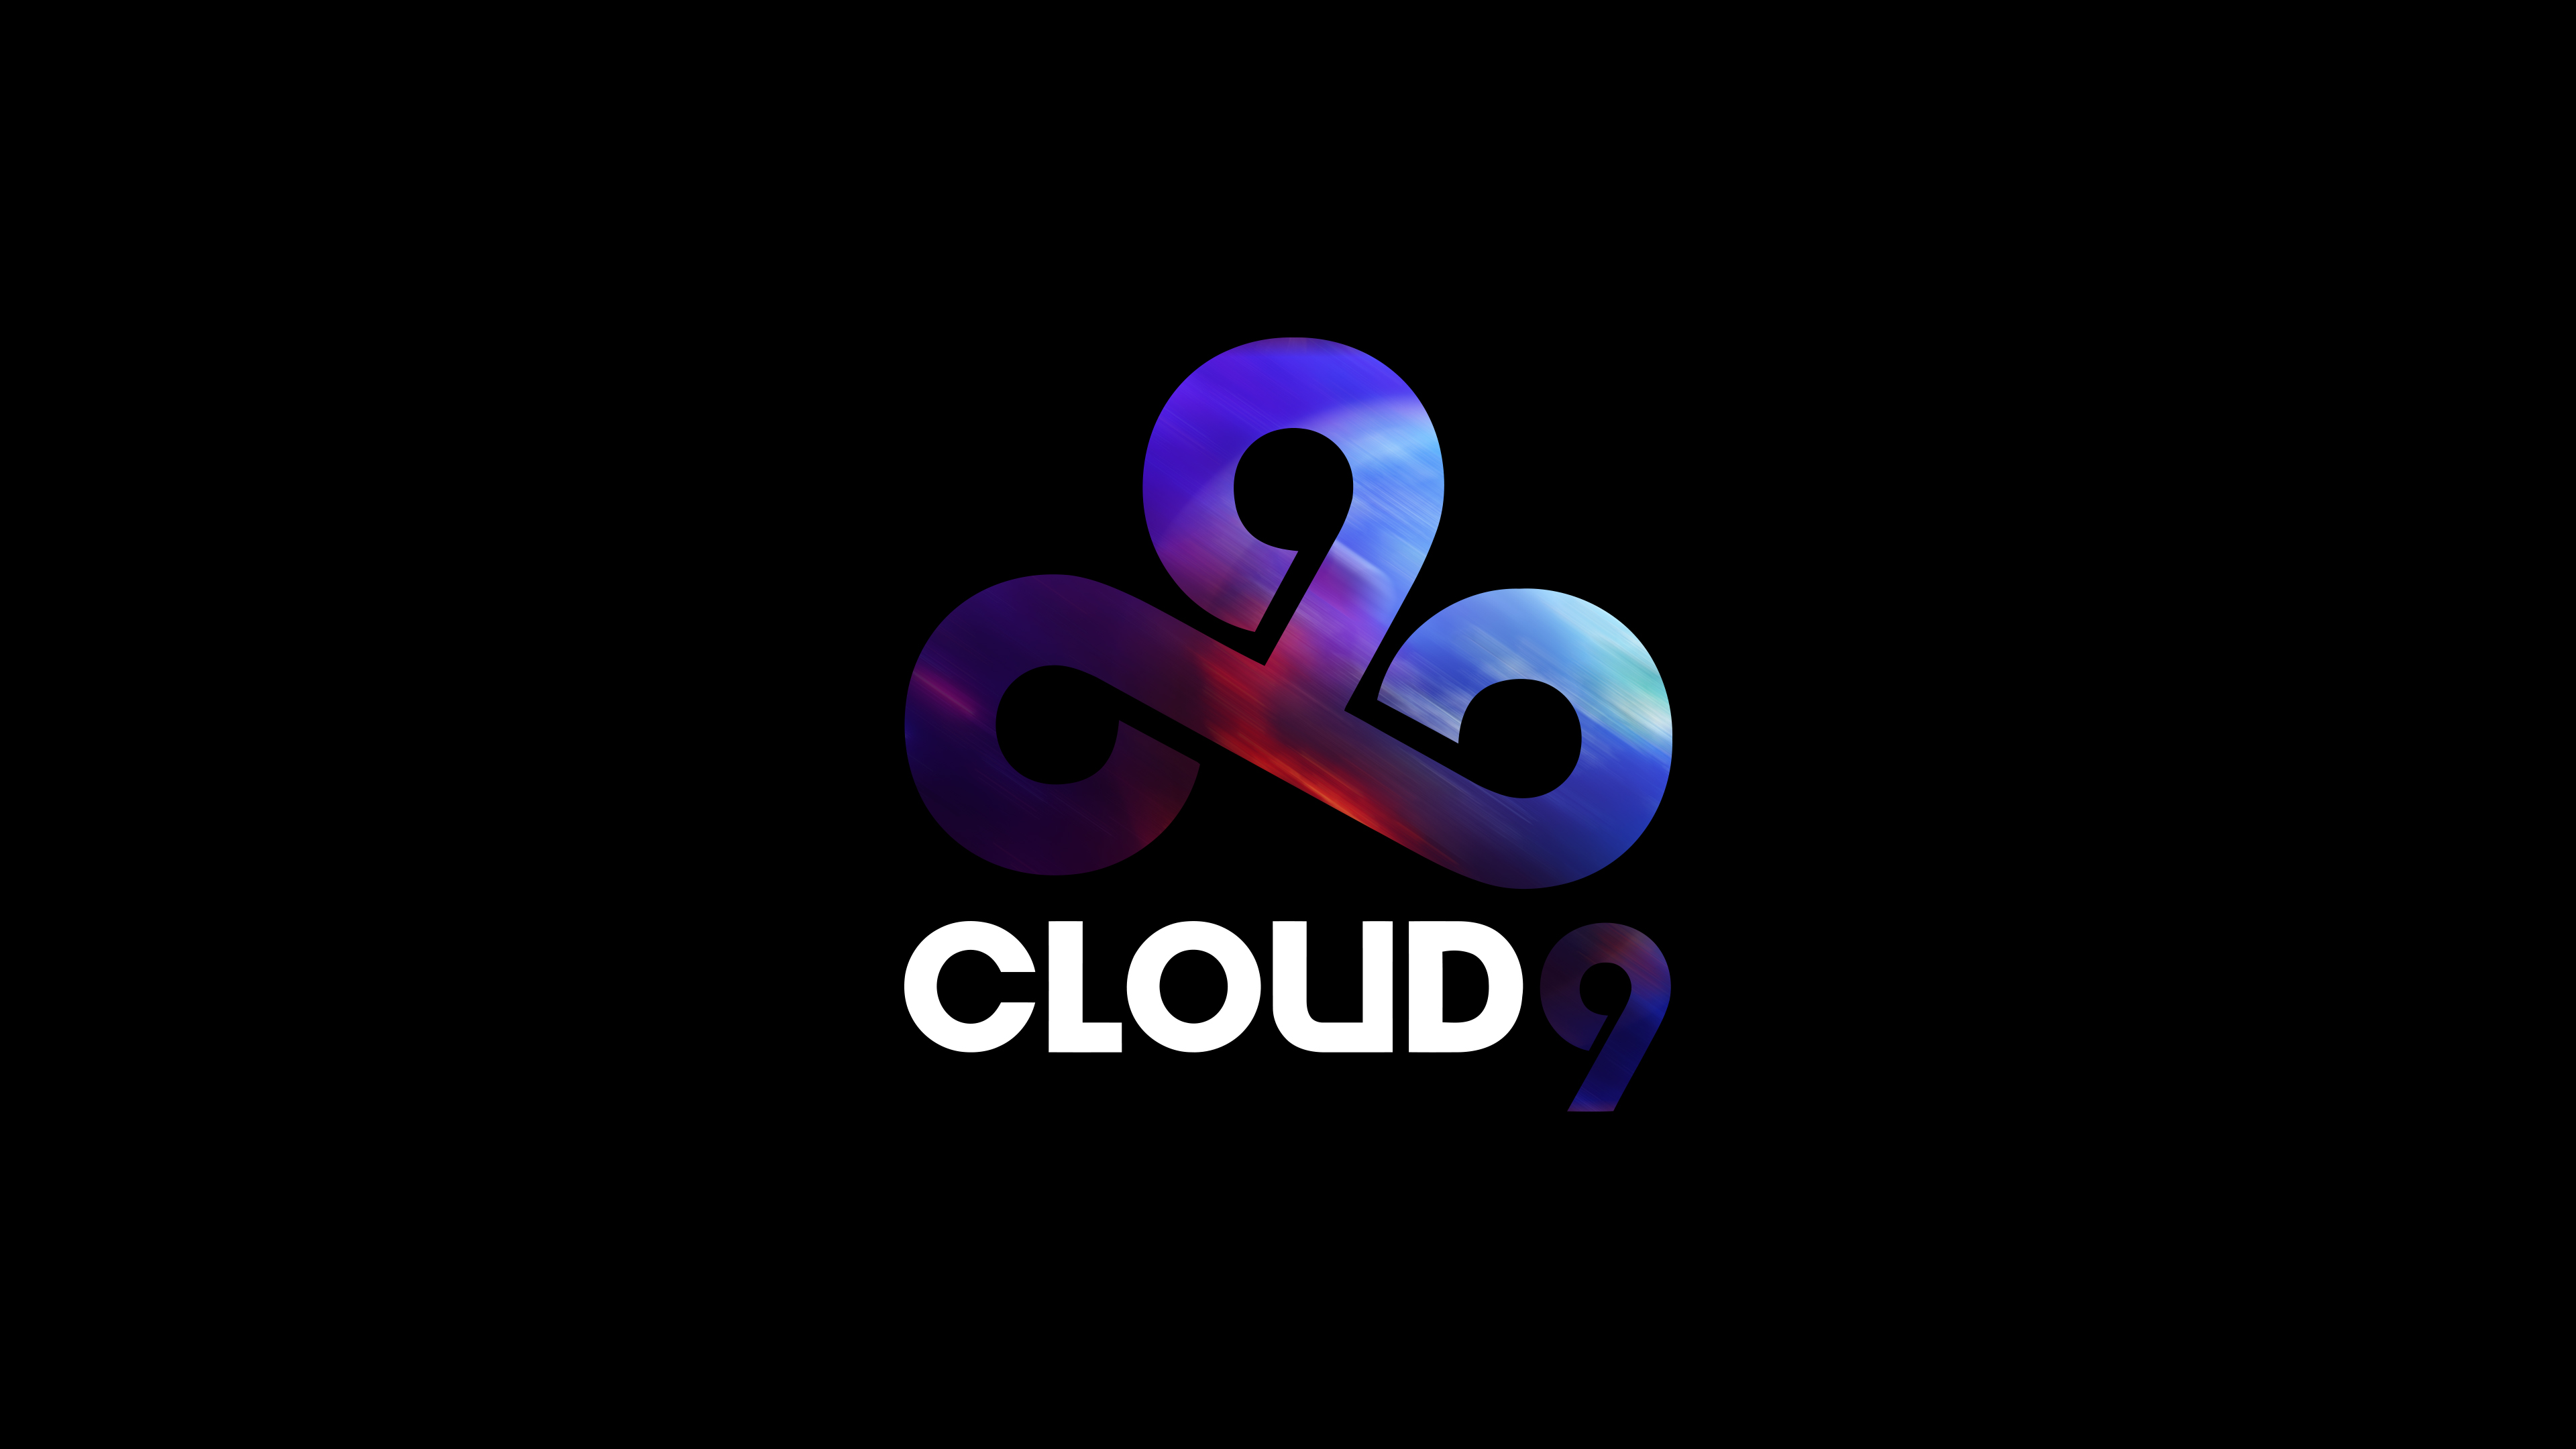 Cloud 9 wallpaper from LoLWallpapers